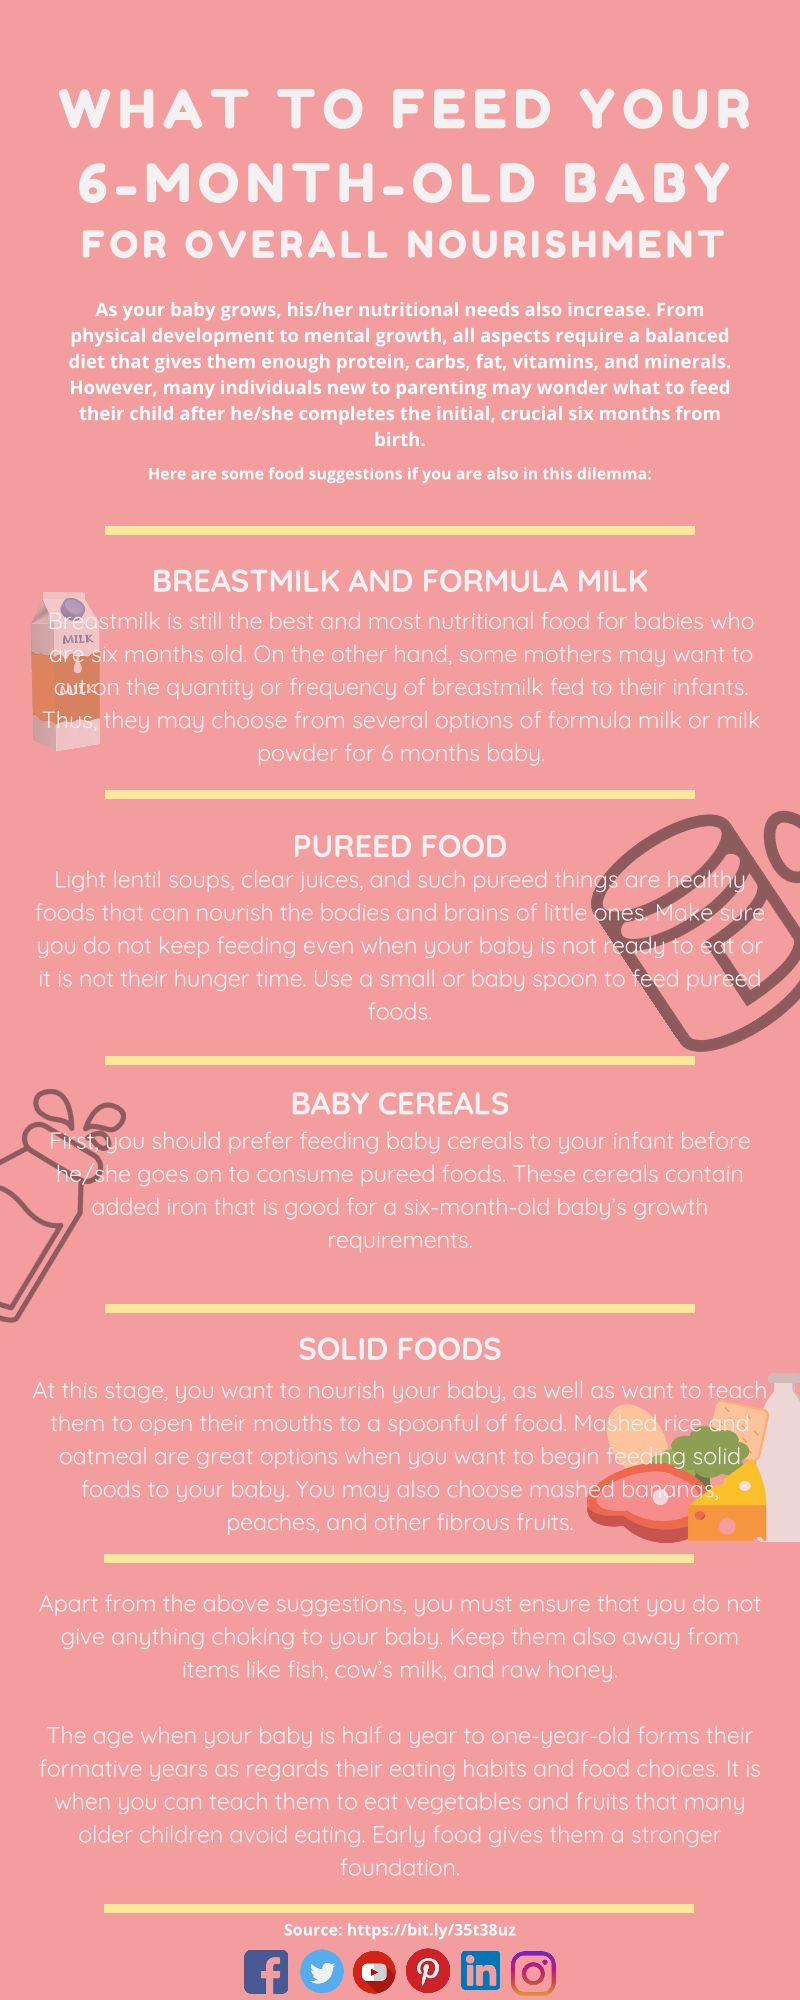 What To Feed Your 6-Month-Old Baby For Overall Nourishment